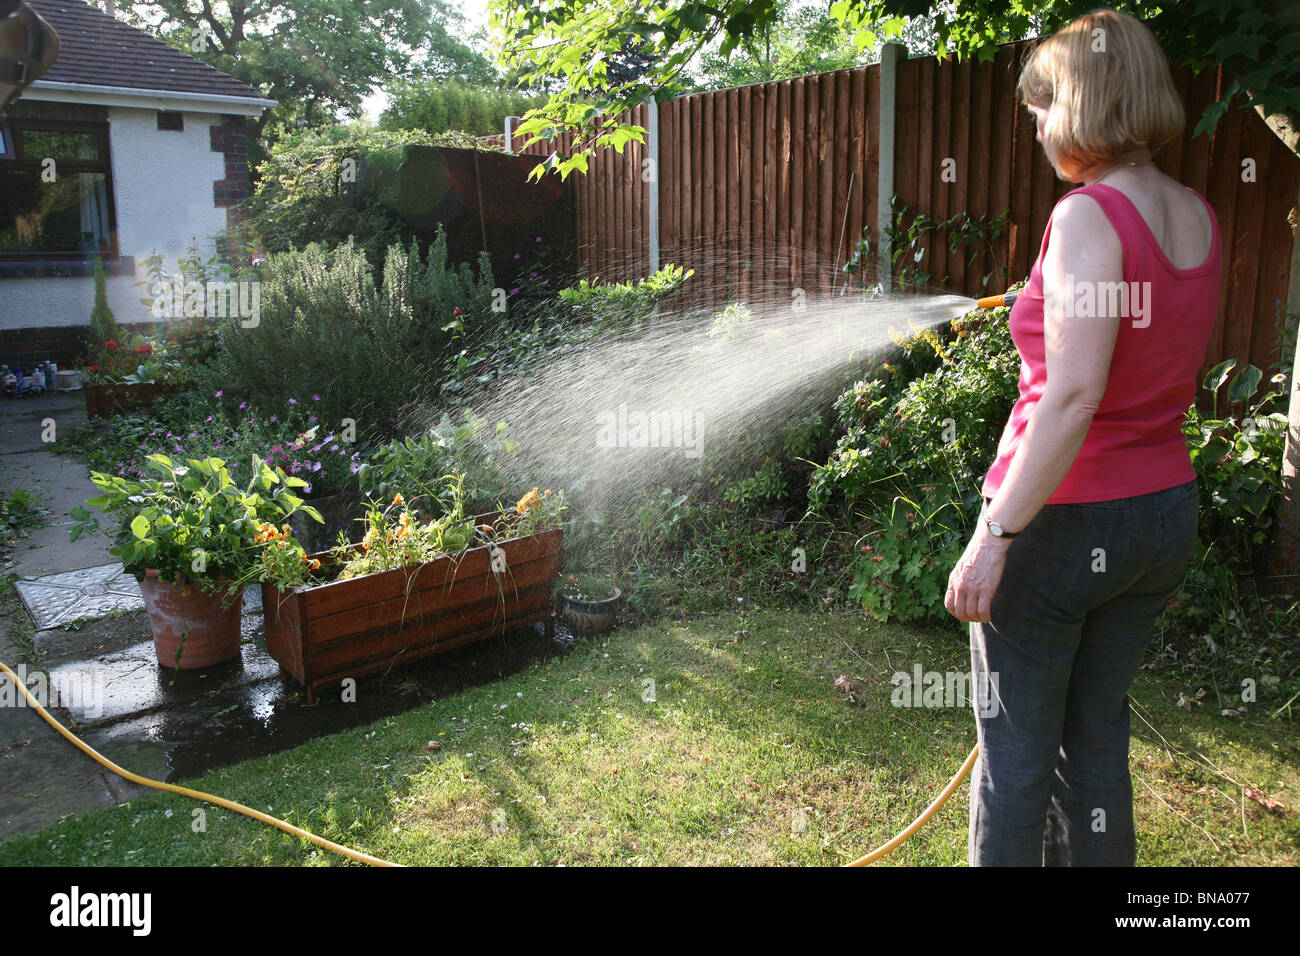 A woman using a hose pipe to water the garden before a ban is imposed Stock Photo